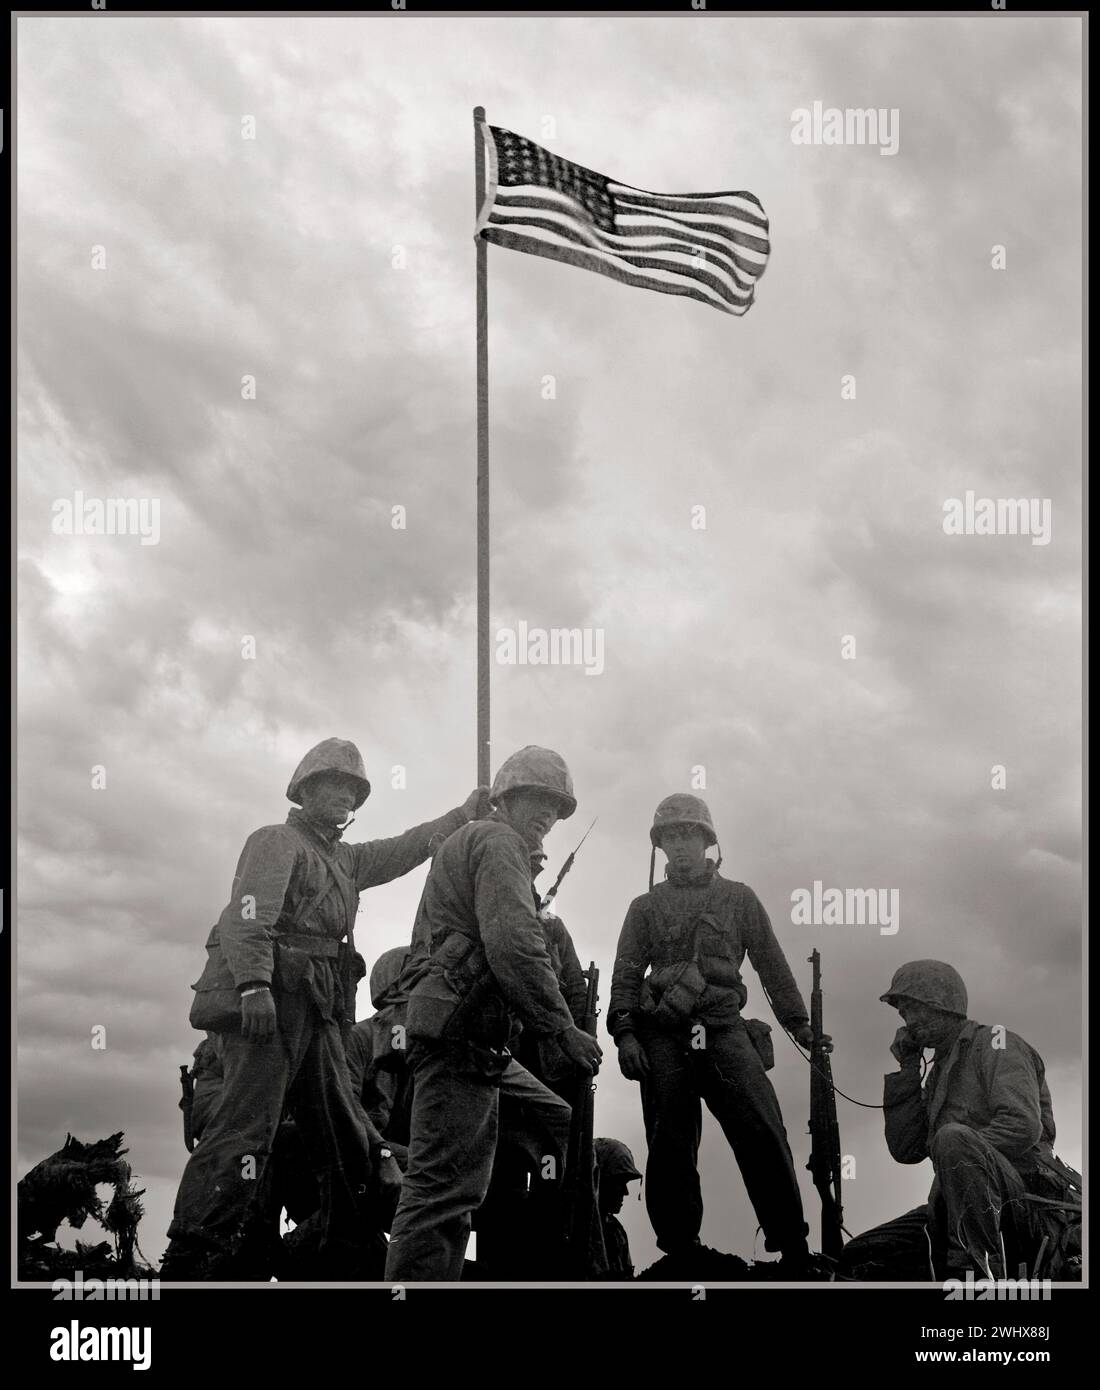 IWO JIMA WW2 First flag raising by American Marines February 1945 The Battle of Iwo Jima was a major battle in which the United States Marine Corps and United States Navy landed on and eventually captured the island of Iwo Jima from the Imperial Japanese Army during World War II. Second World War Pacific War Stock Photo